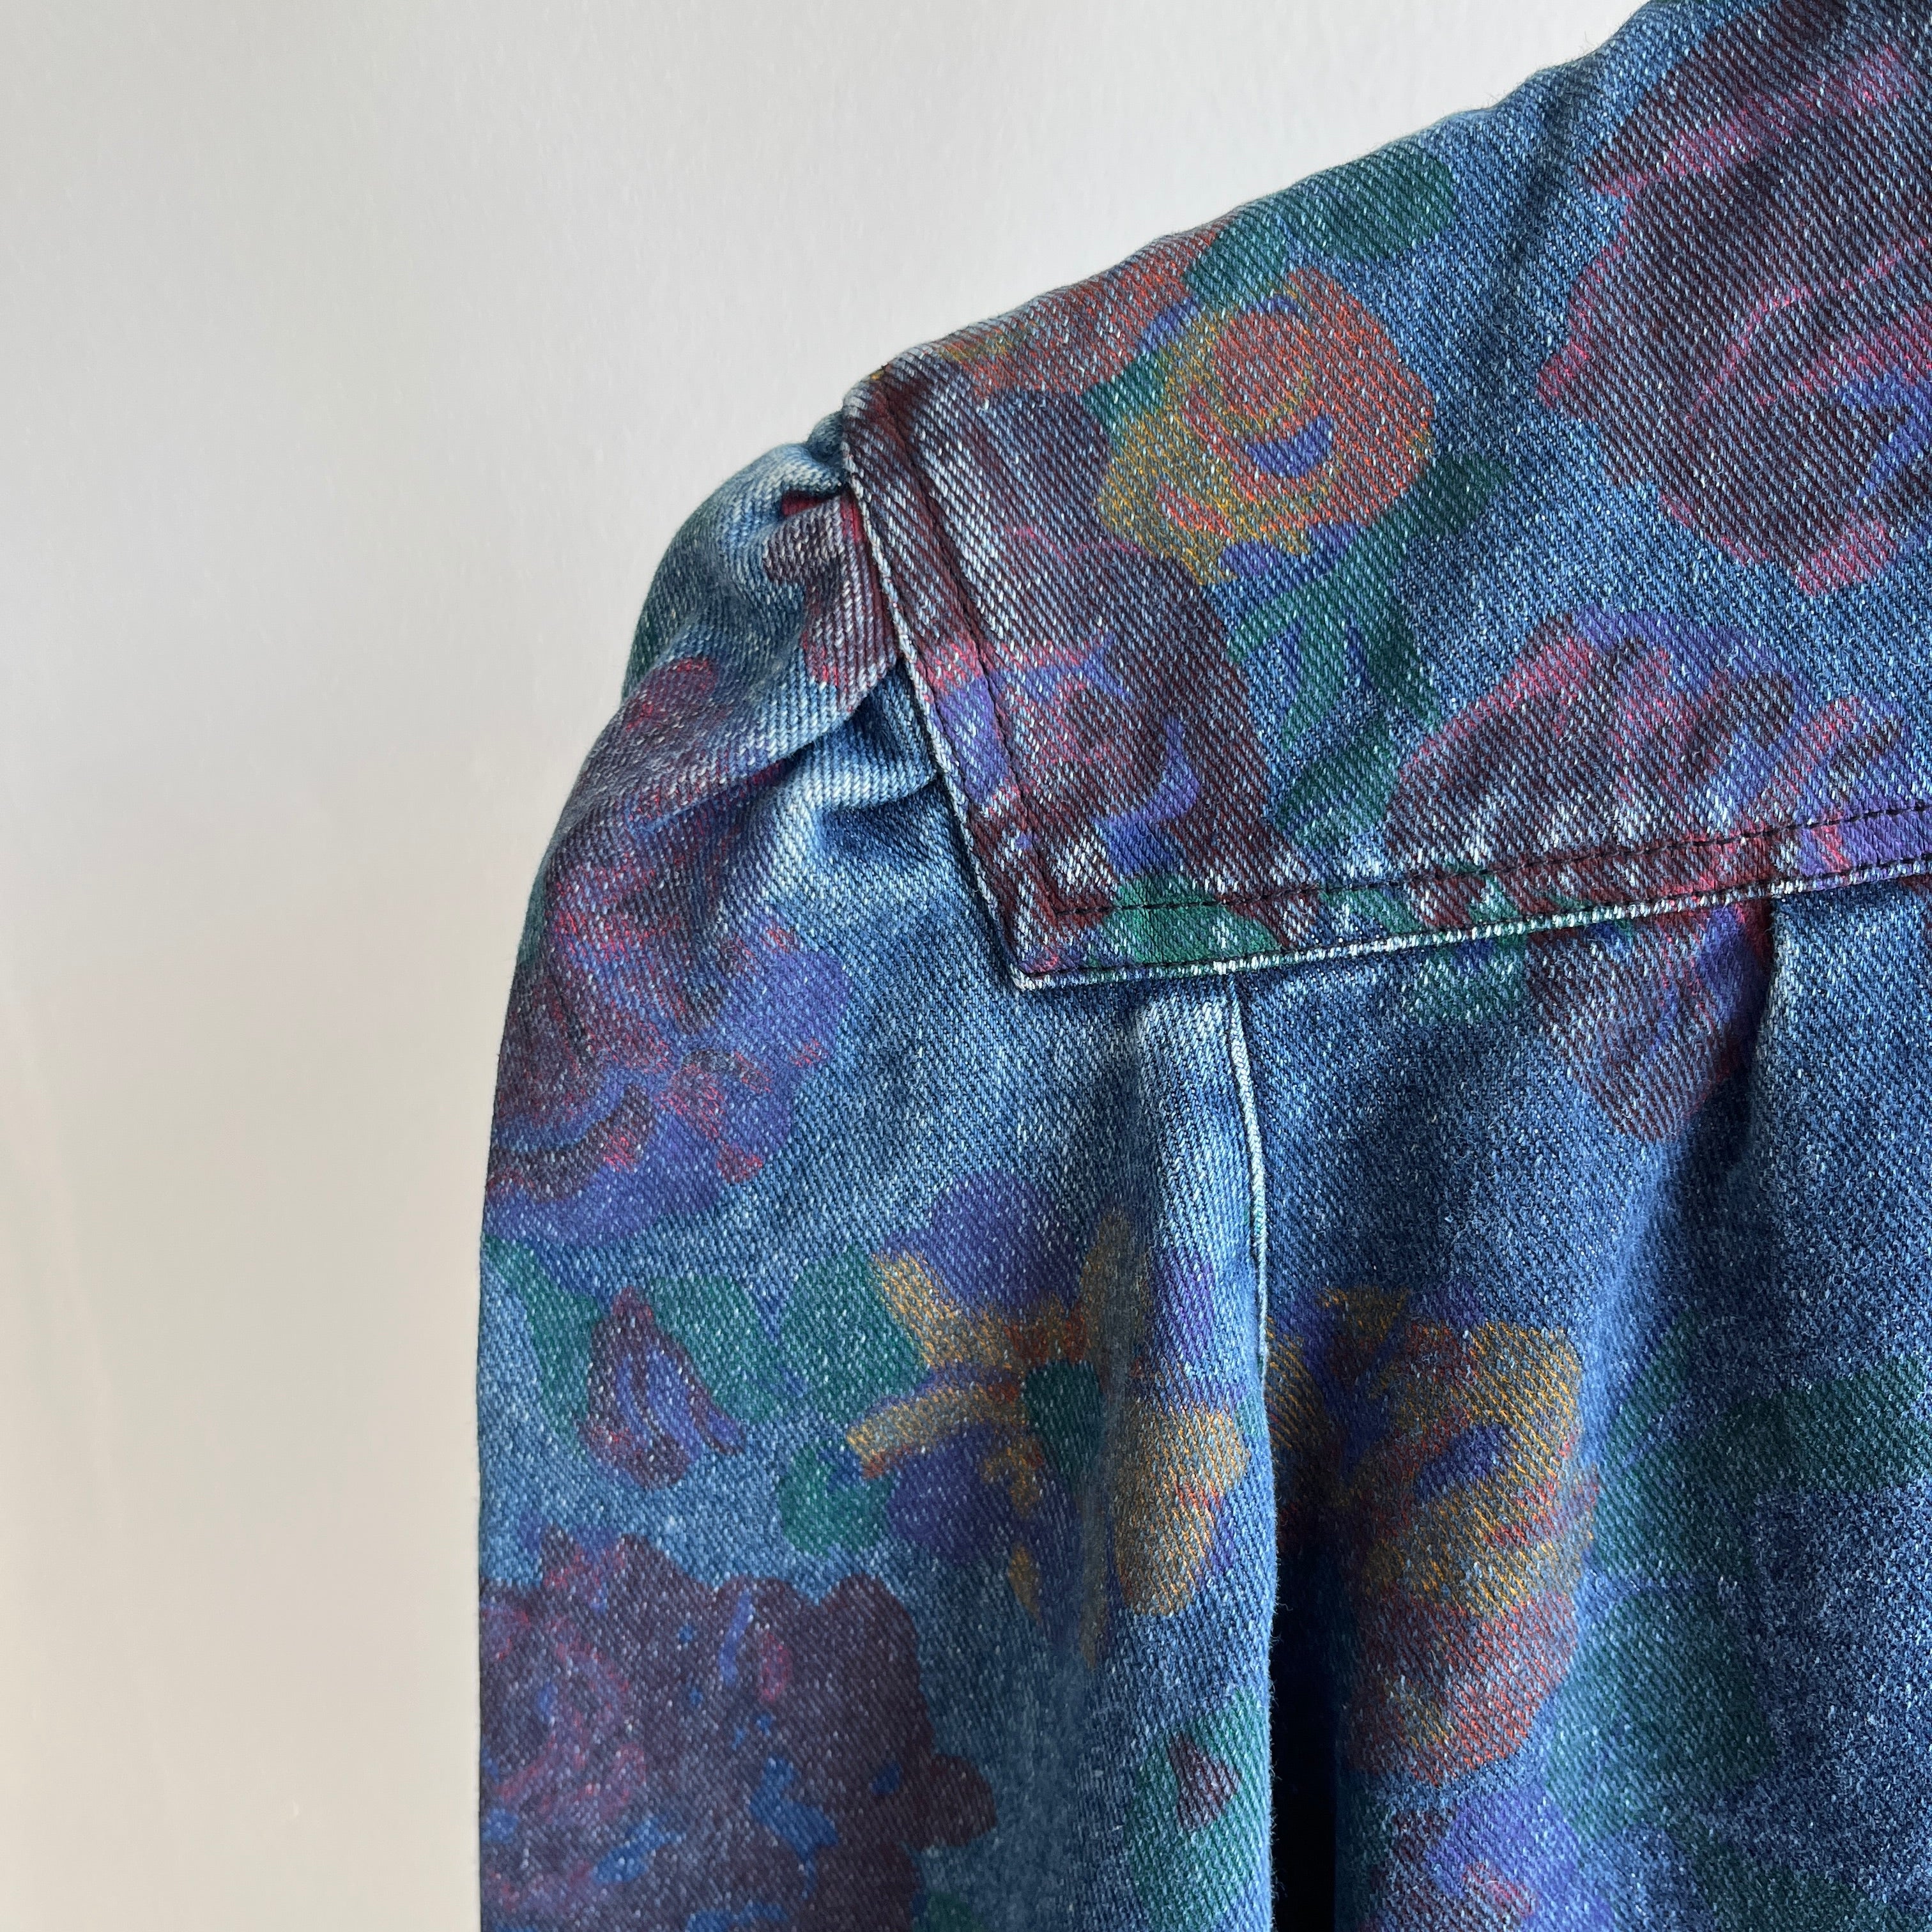 1980s Floral Puff Sleeves Babe of a Denim Jacket - !!!!!